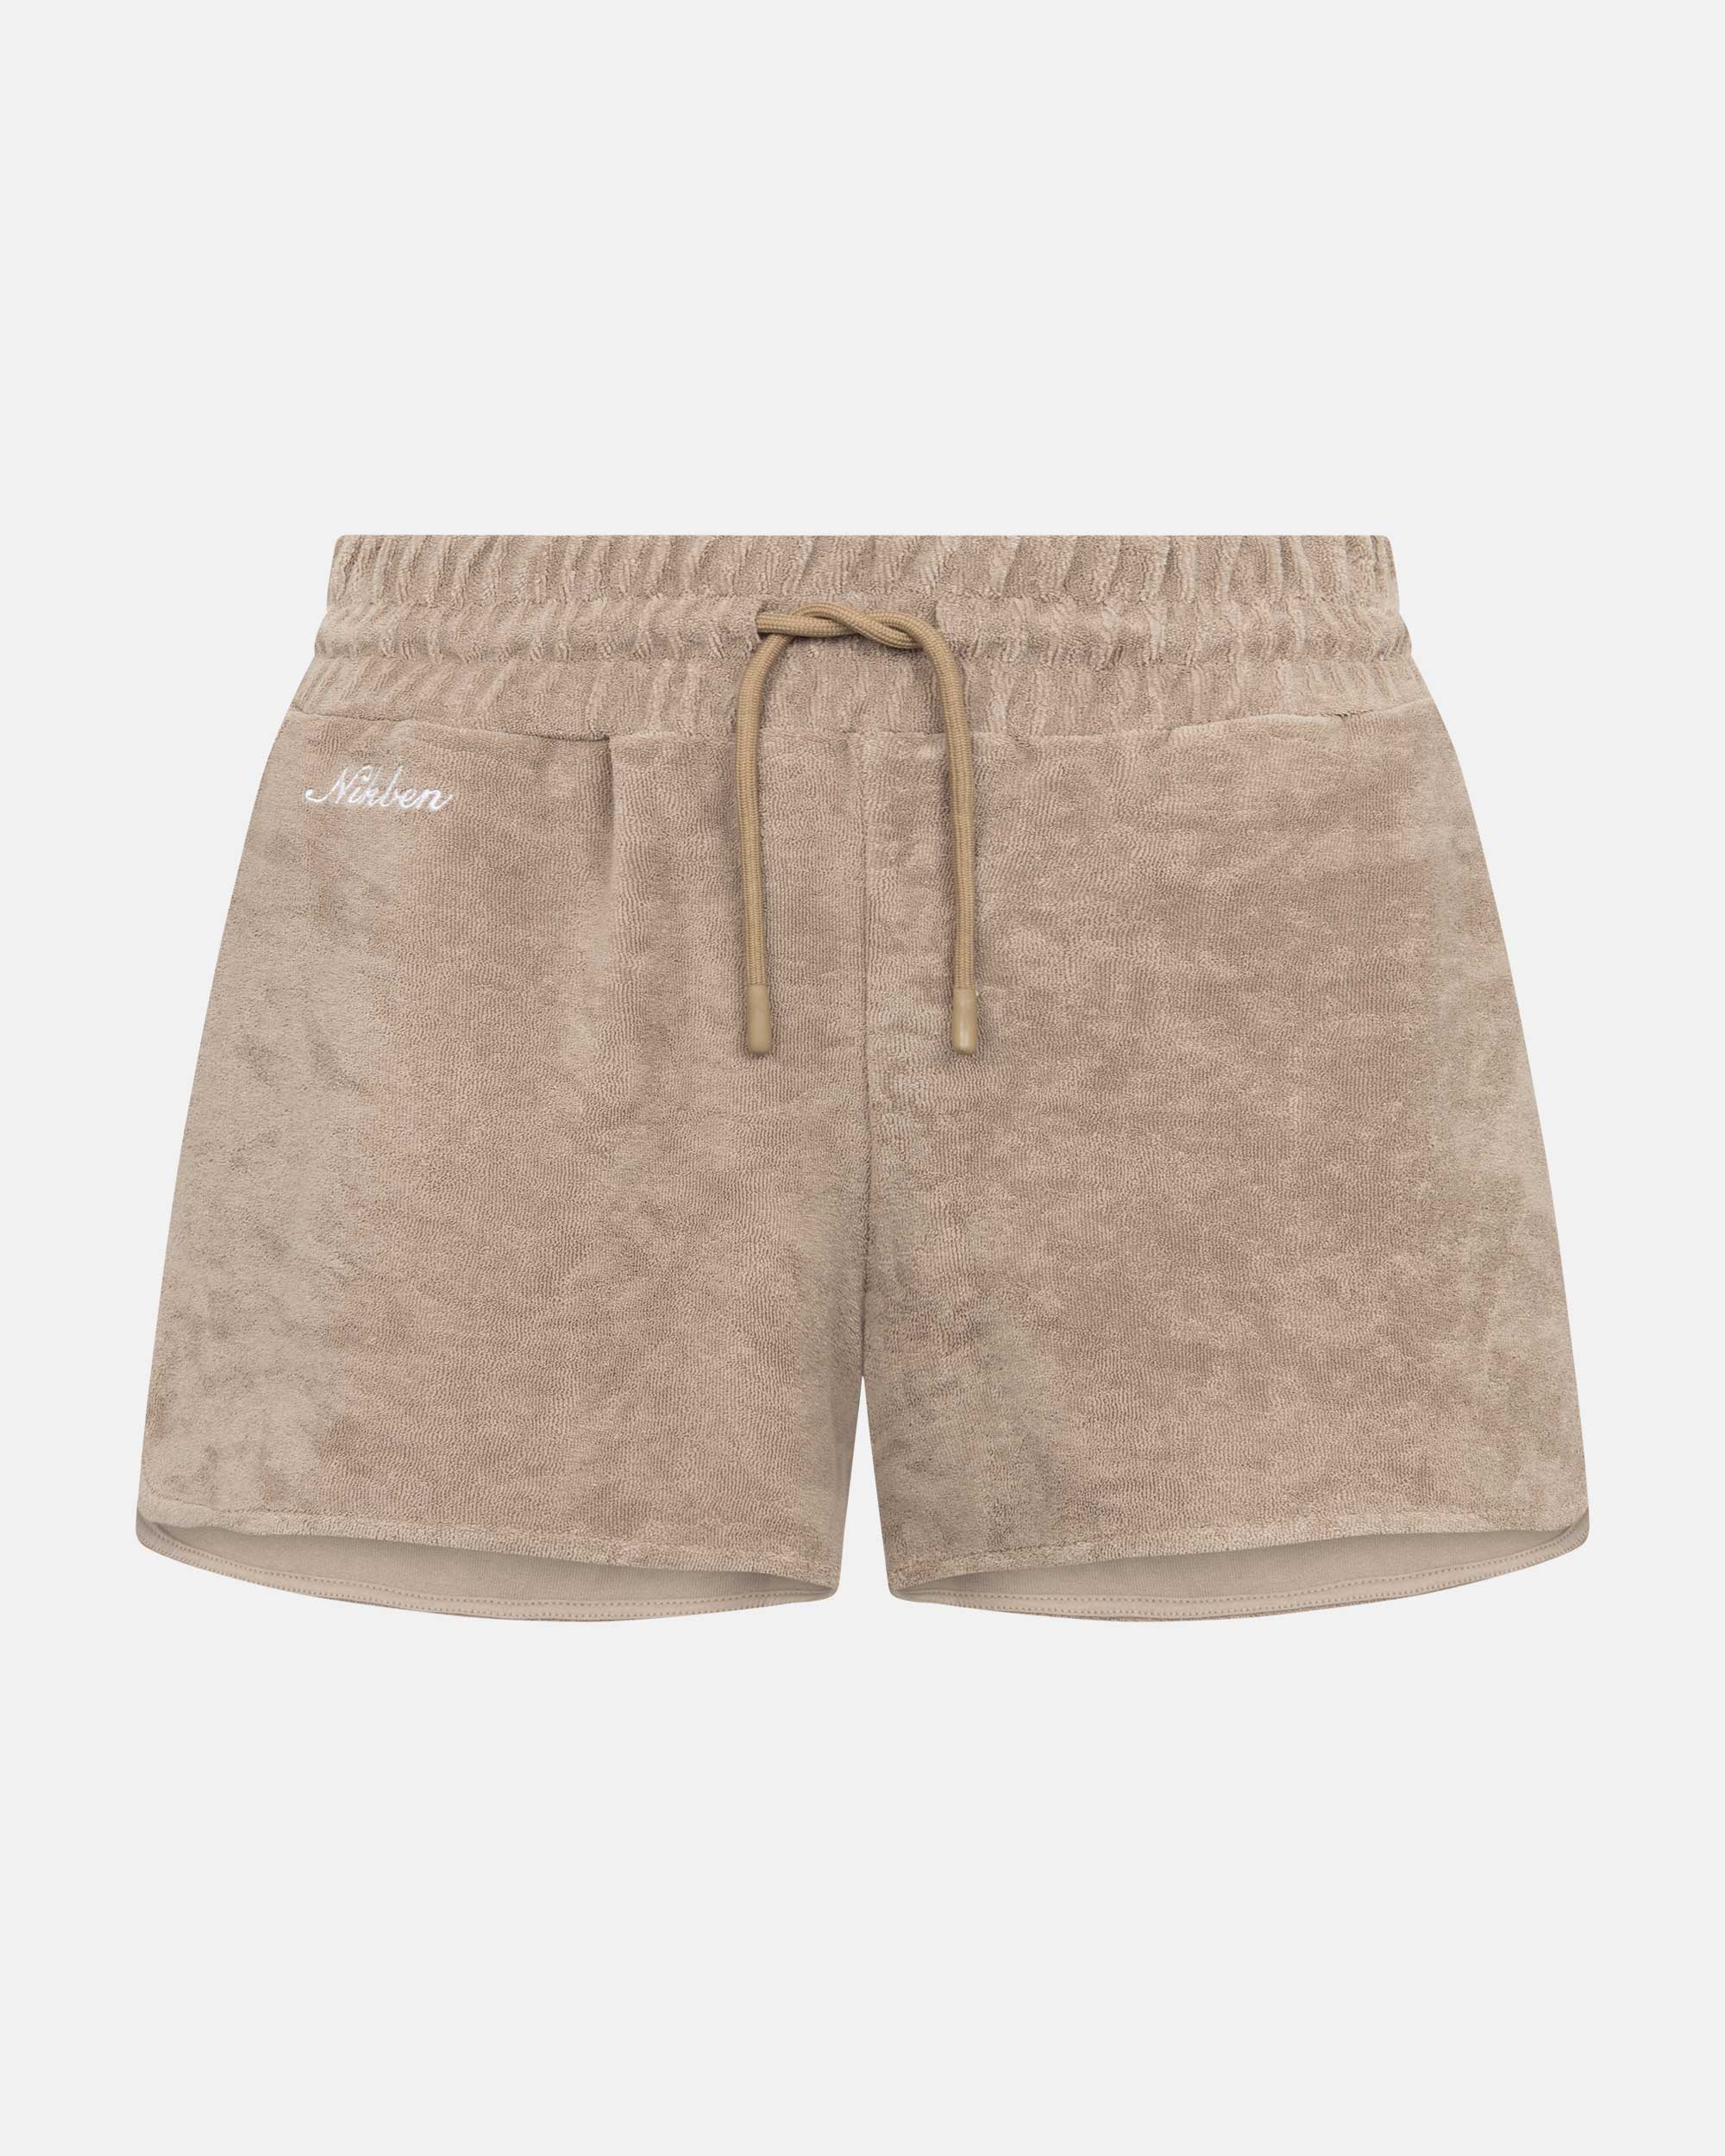 Light brown low cut shorts in terry toweling fabric with drawstring and two side pockets.